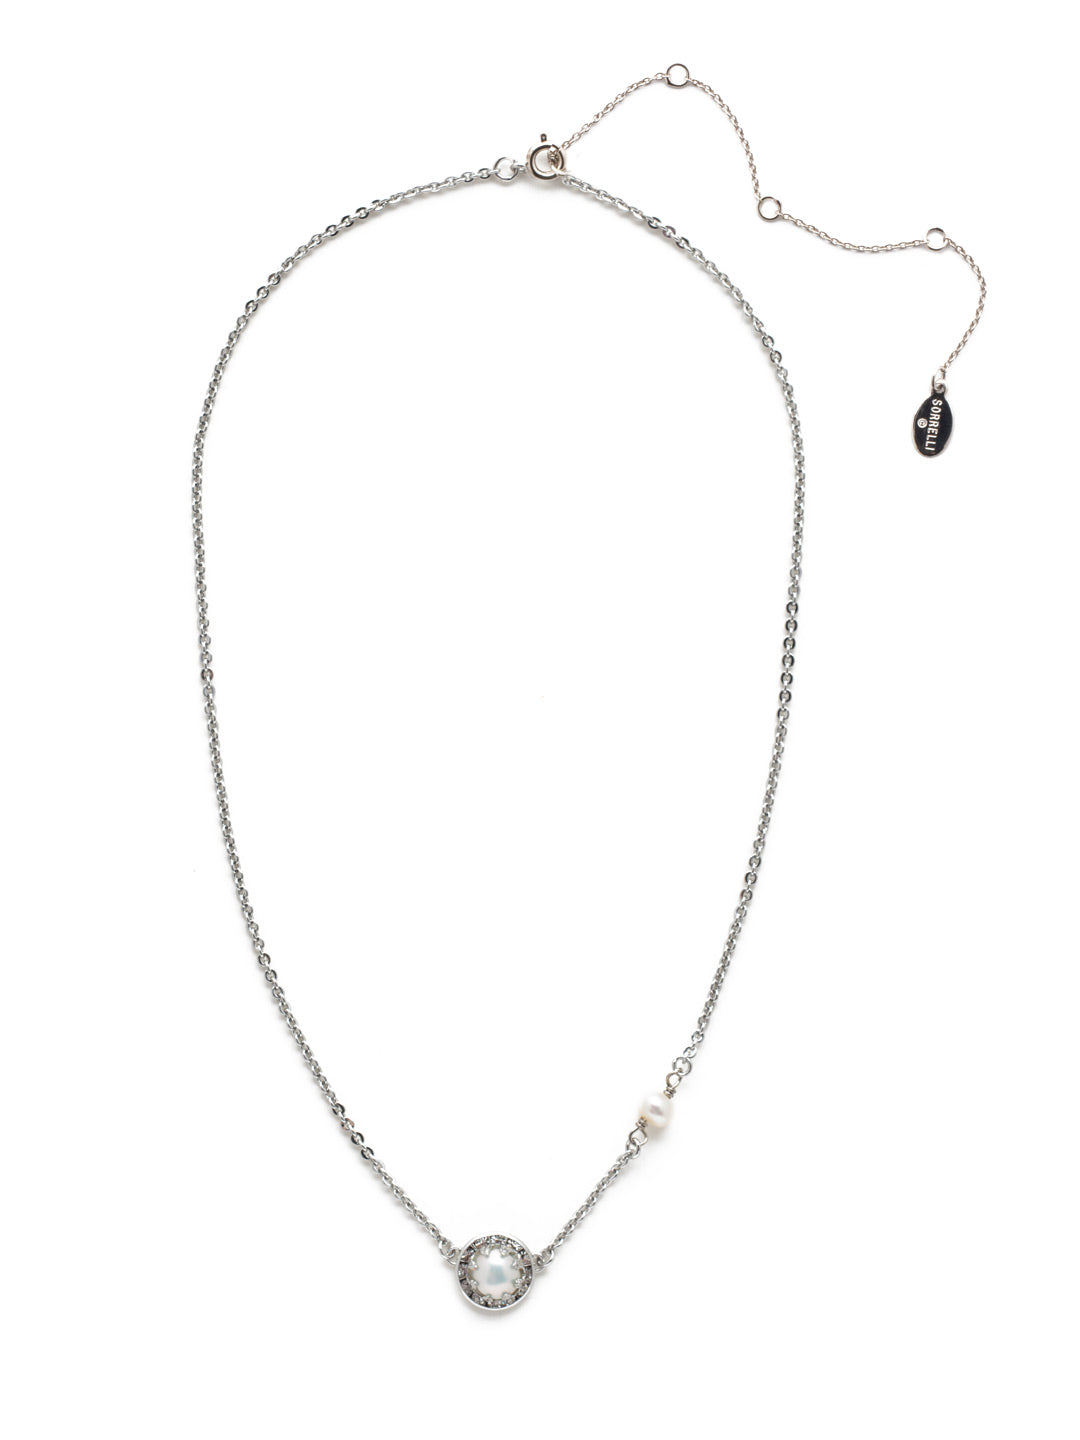 Blair Pendant Necklace - NEV105PDCRY - <p>The Blair Pendant Necklace is the perfect dainty piece to wear with everything! A freshwater pearl takes the spotlight, set in a halo of crystals, while a single delicate pearl sits offset on the adjustable chain. A spring ring clasp secures the necklace. From Sorrelli's Crystal collection in our Palladium finish.</p>